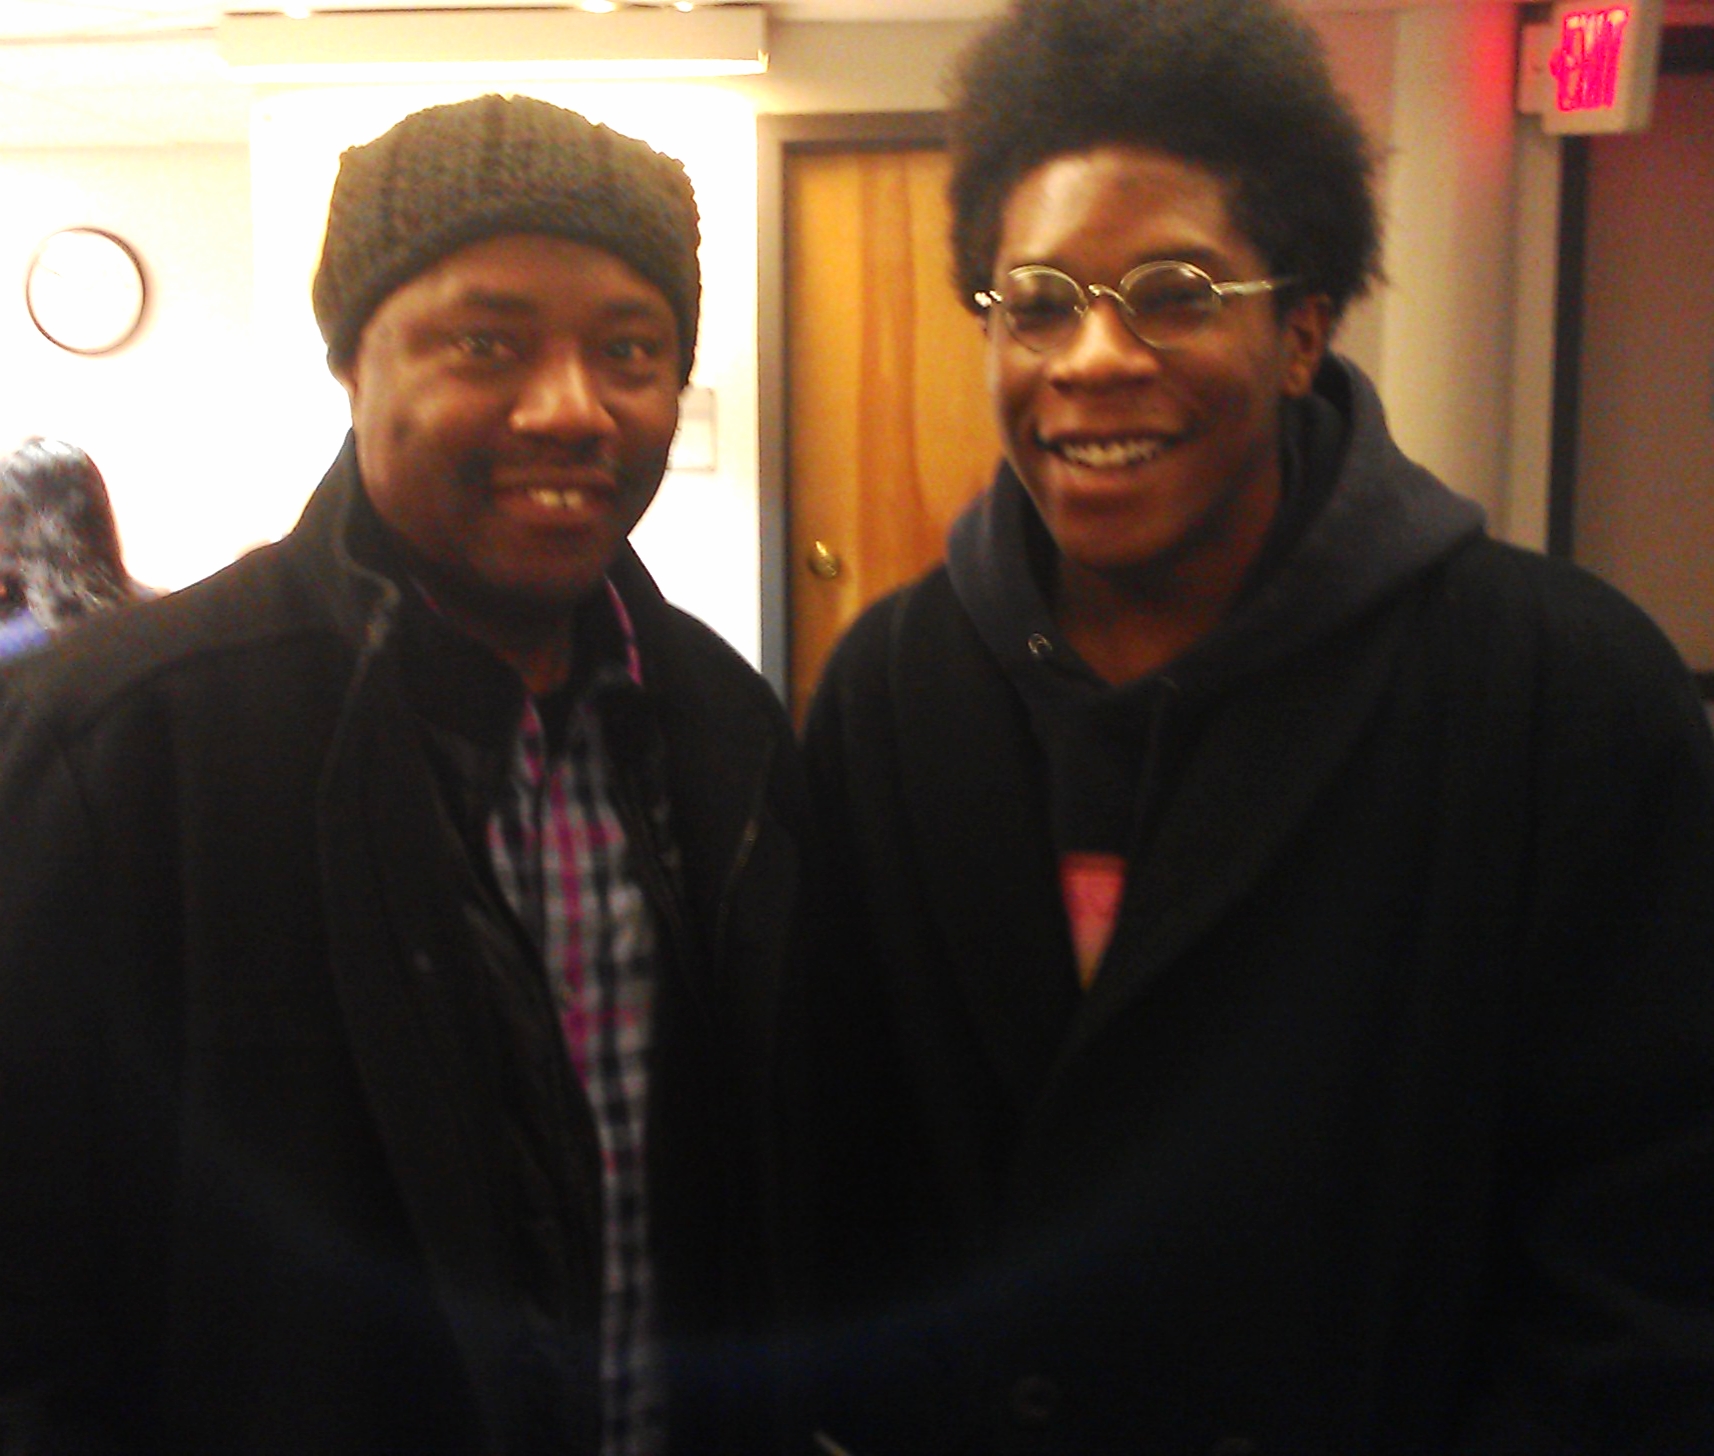 Ran into master drummer Lenny White at Berklee Professional Writing Center.